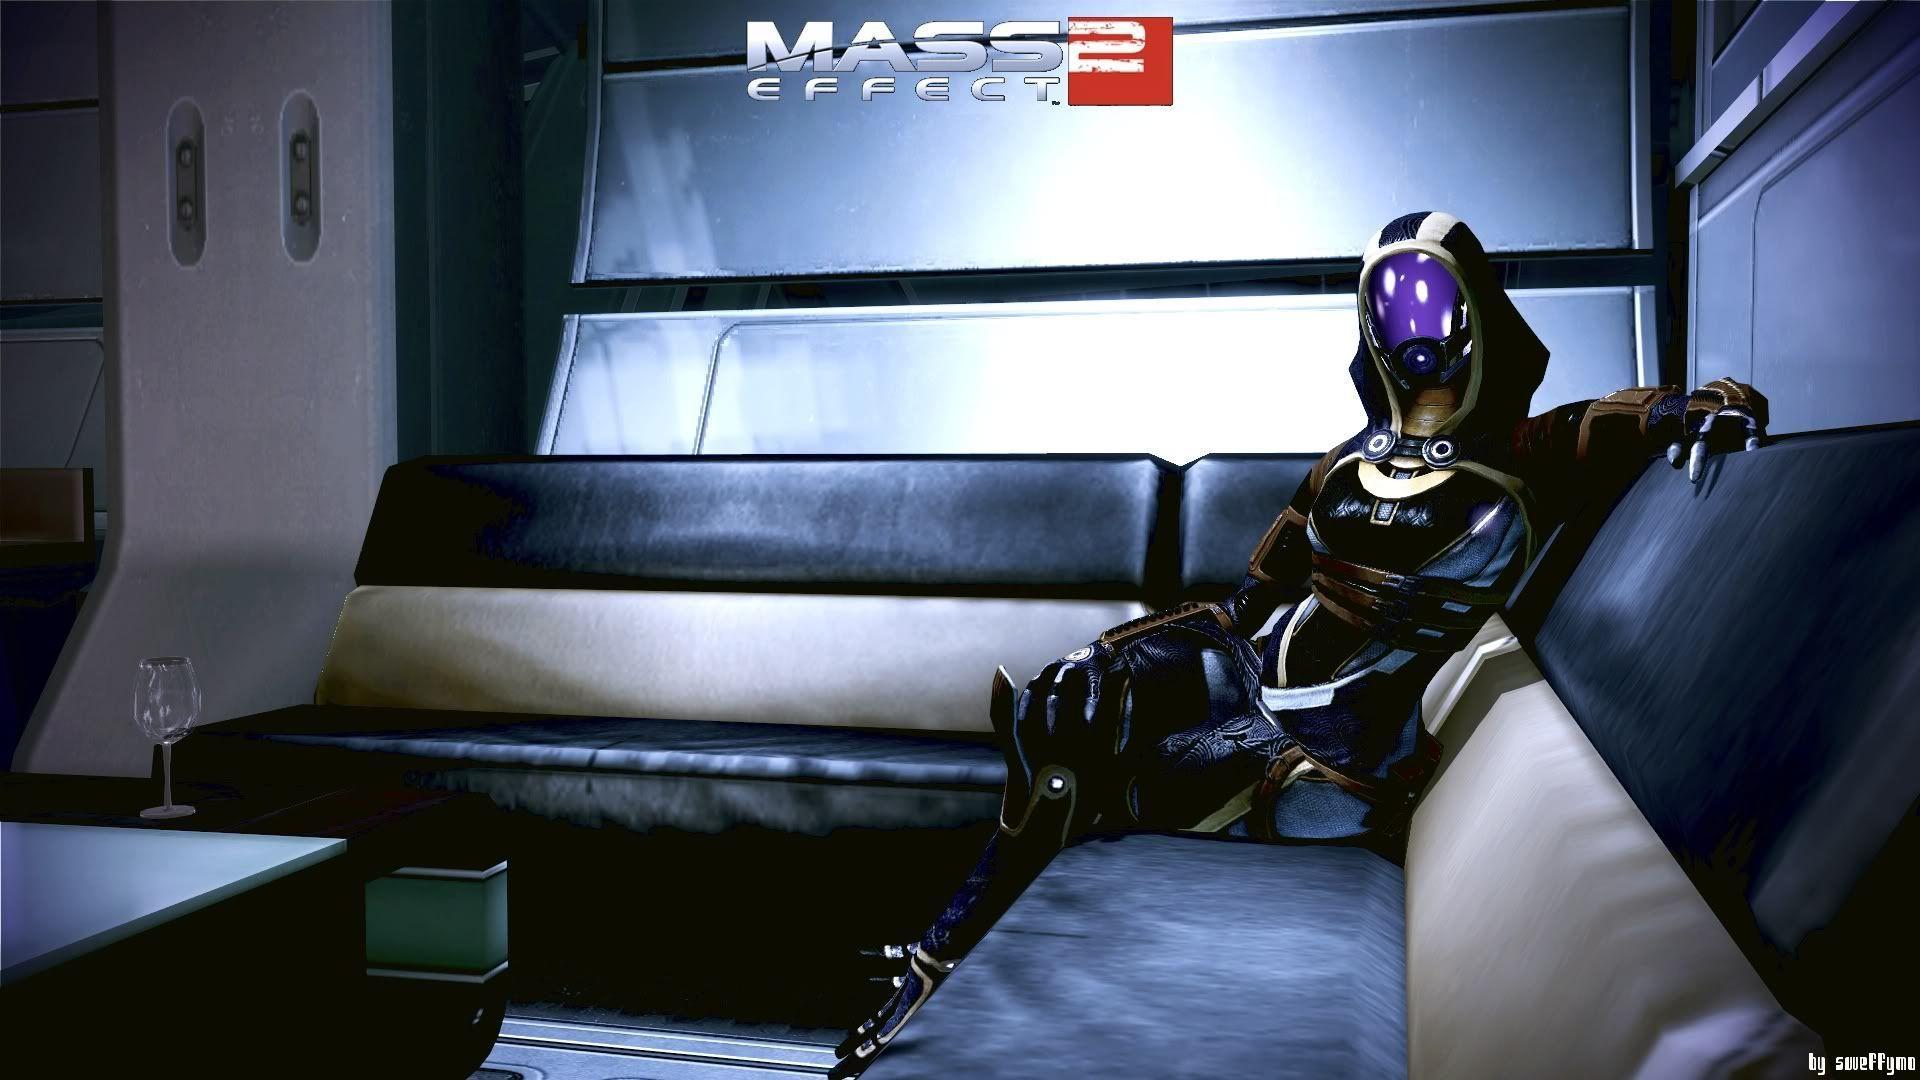 Tali ME2 Wallpaper And YouTube Videos That I Have Made **HUGE 56k